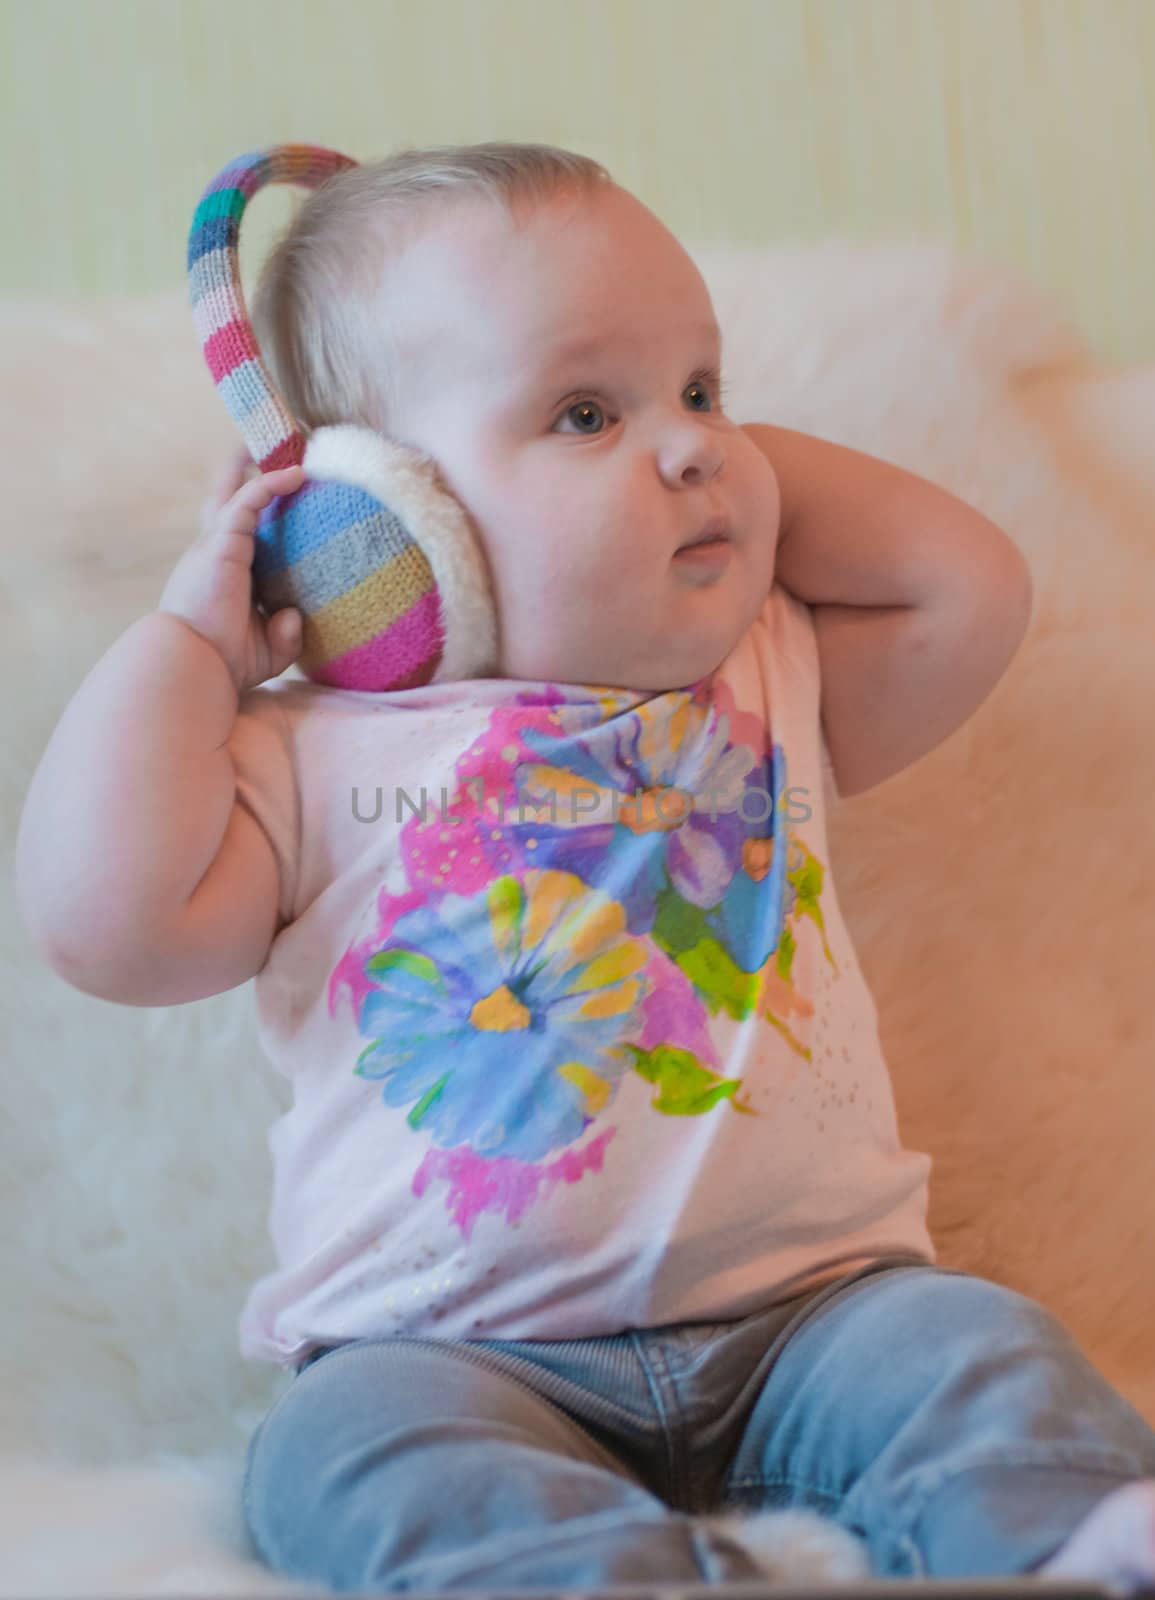 Baby with headphones by Linaga